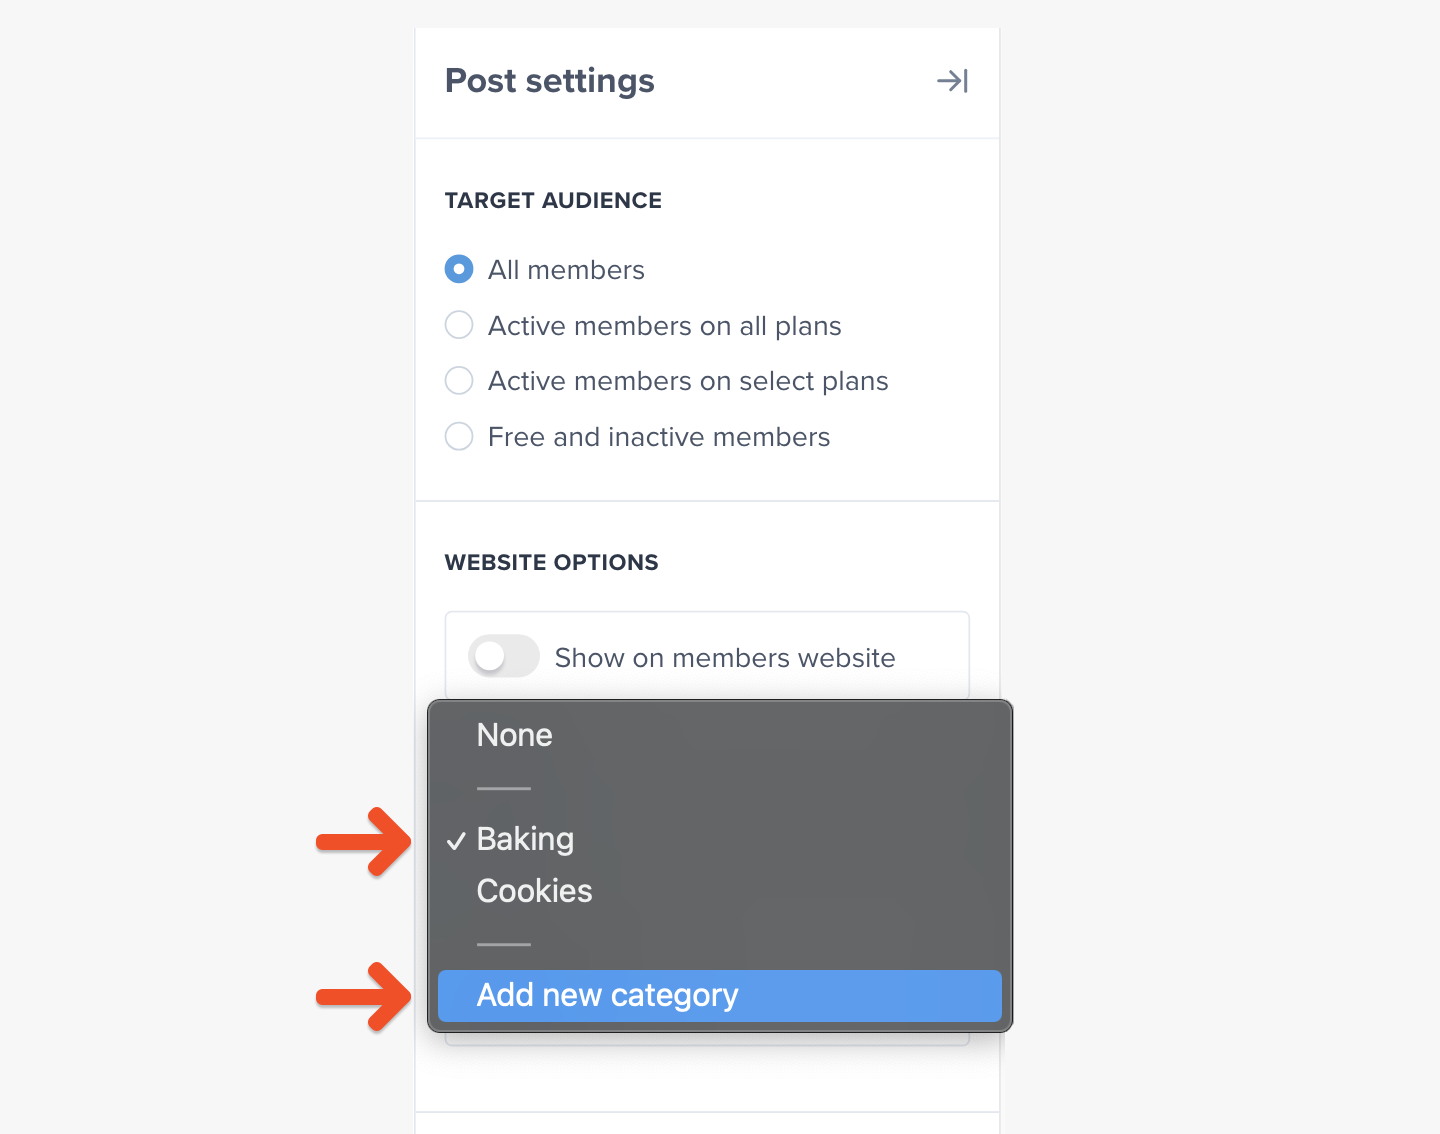 Access categories from post